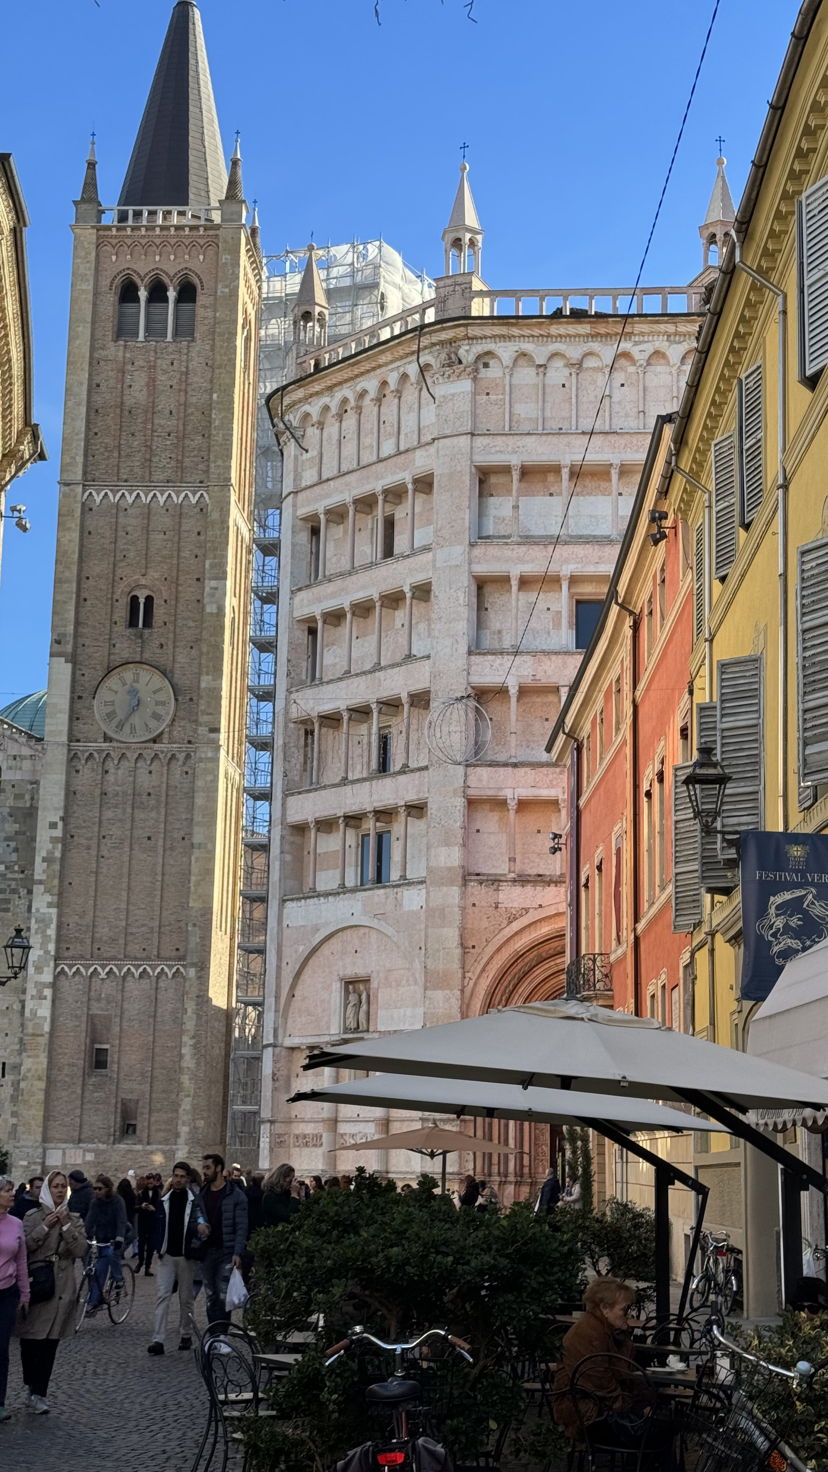 Food & Wine Tours Parma: Food tour in Parma, the city of food!